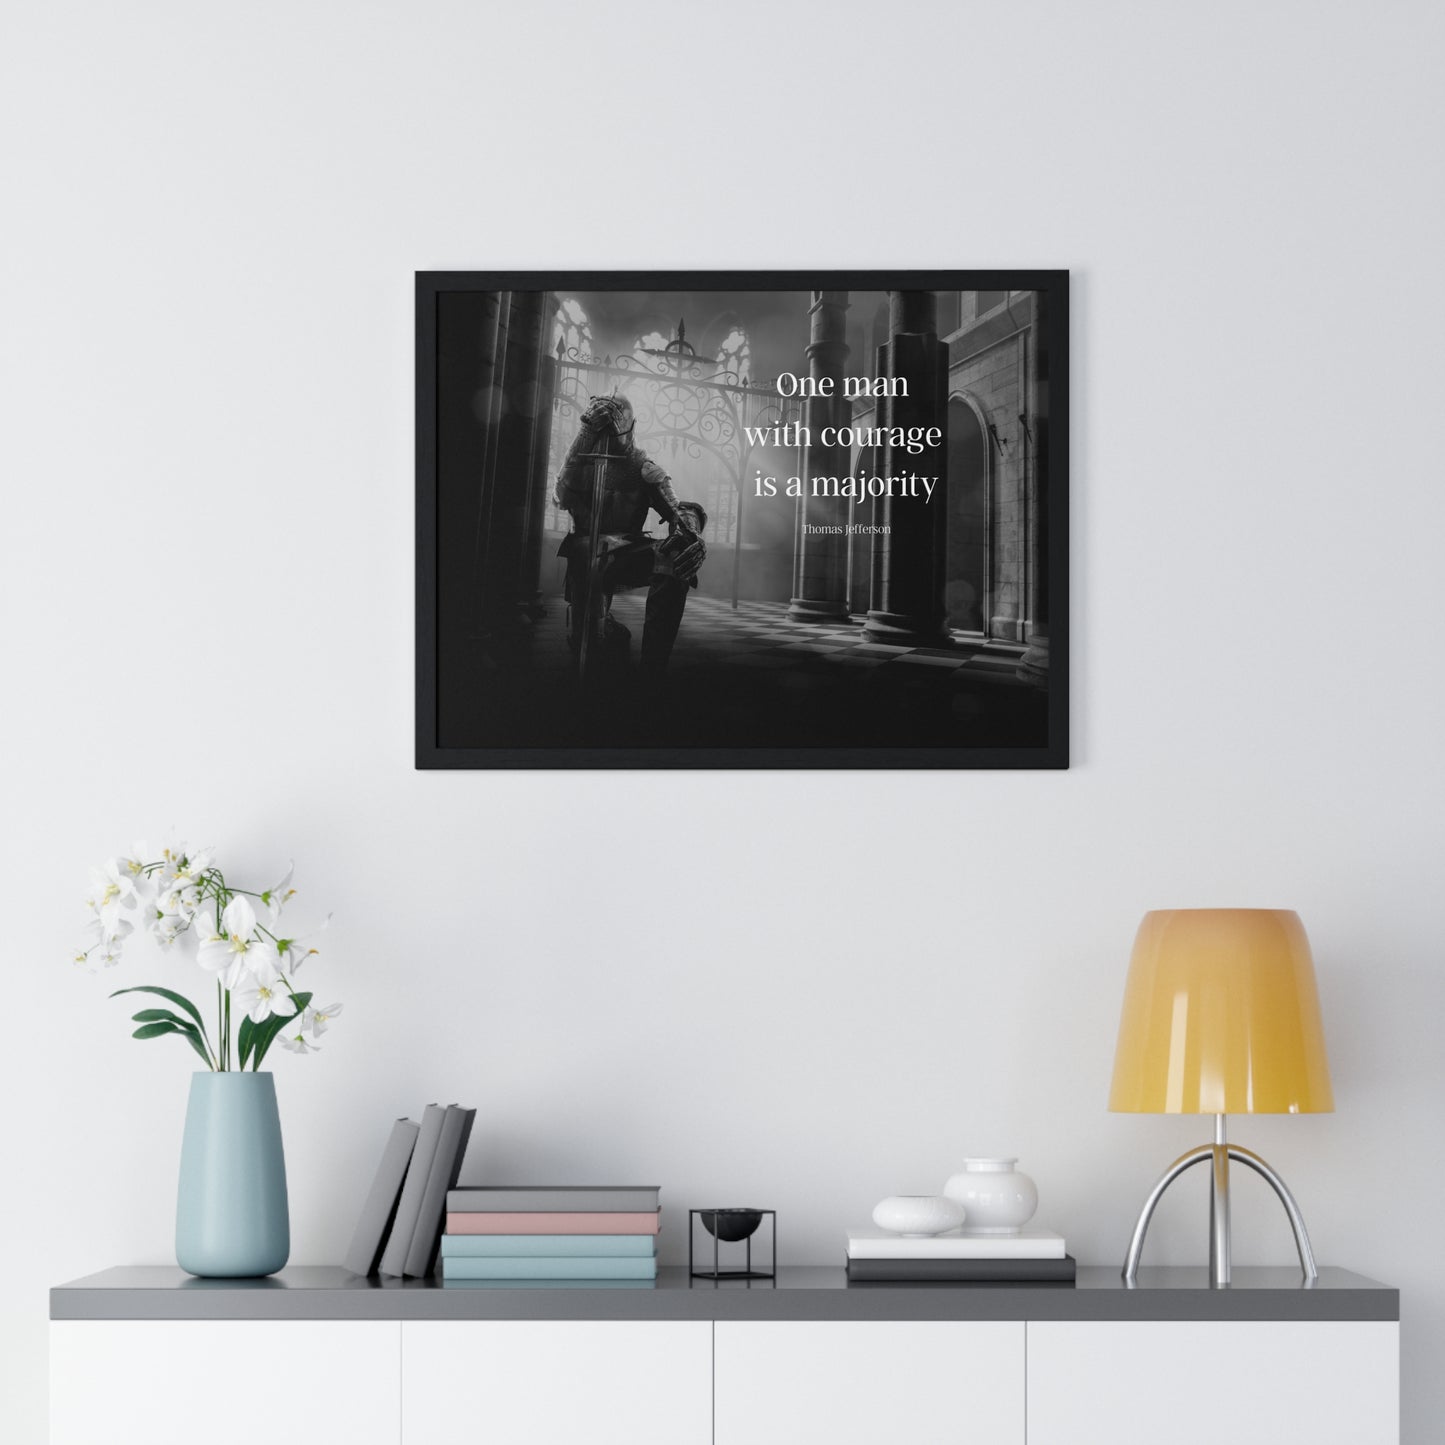 Thomas Jefferson Quote 4, Poster Art, Horizontal Print, Knight, Courage 3rd President of the United States, American Patriots, AI Art, Political Art, Presidential Quotes, Inspirational Quotes